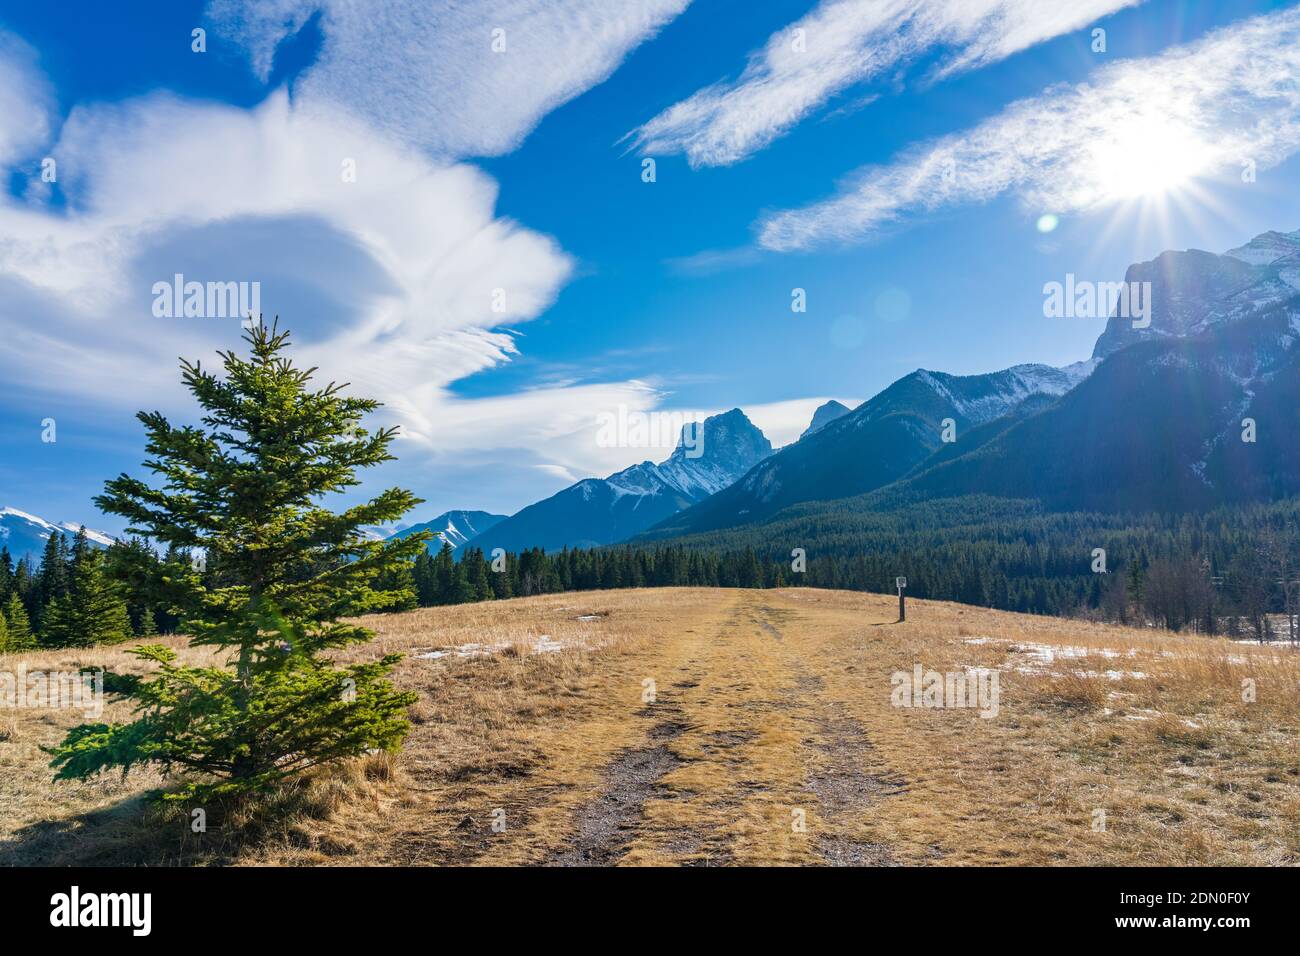 Quarry Lake Park, serene mountainside beach and dog park in late autumn season sunny day morning. Snow capped mountains with blue sky and white clouds Stock Photo